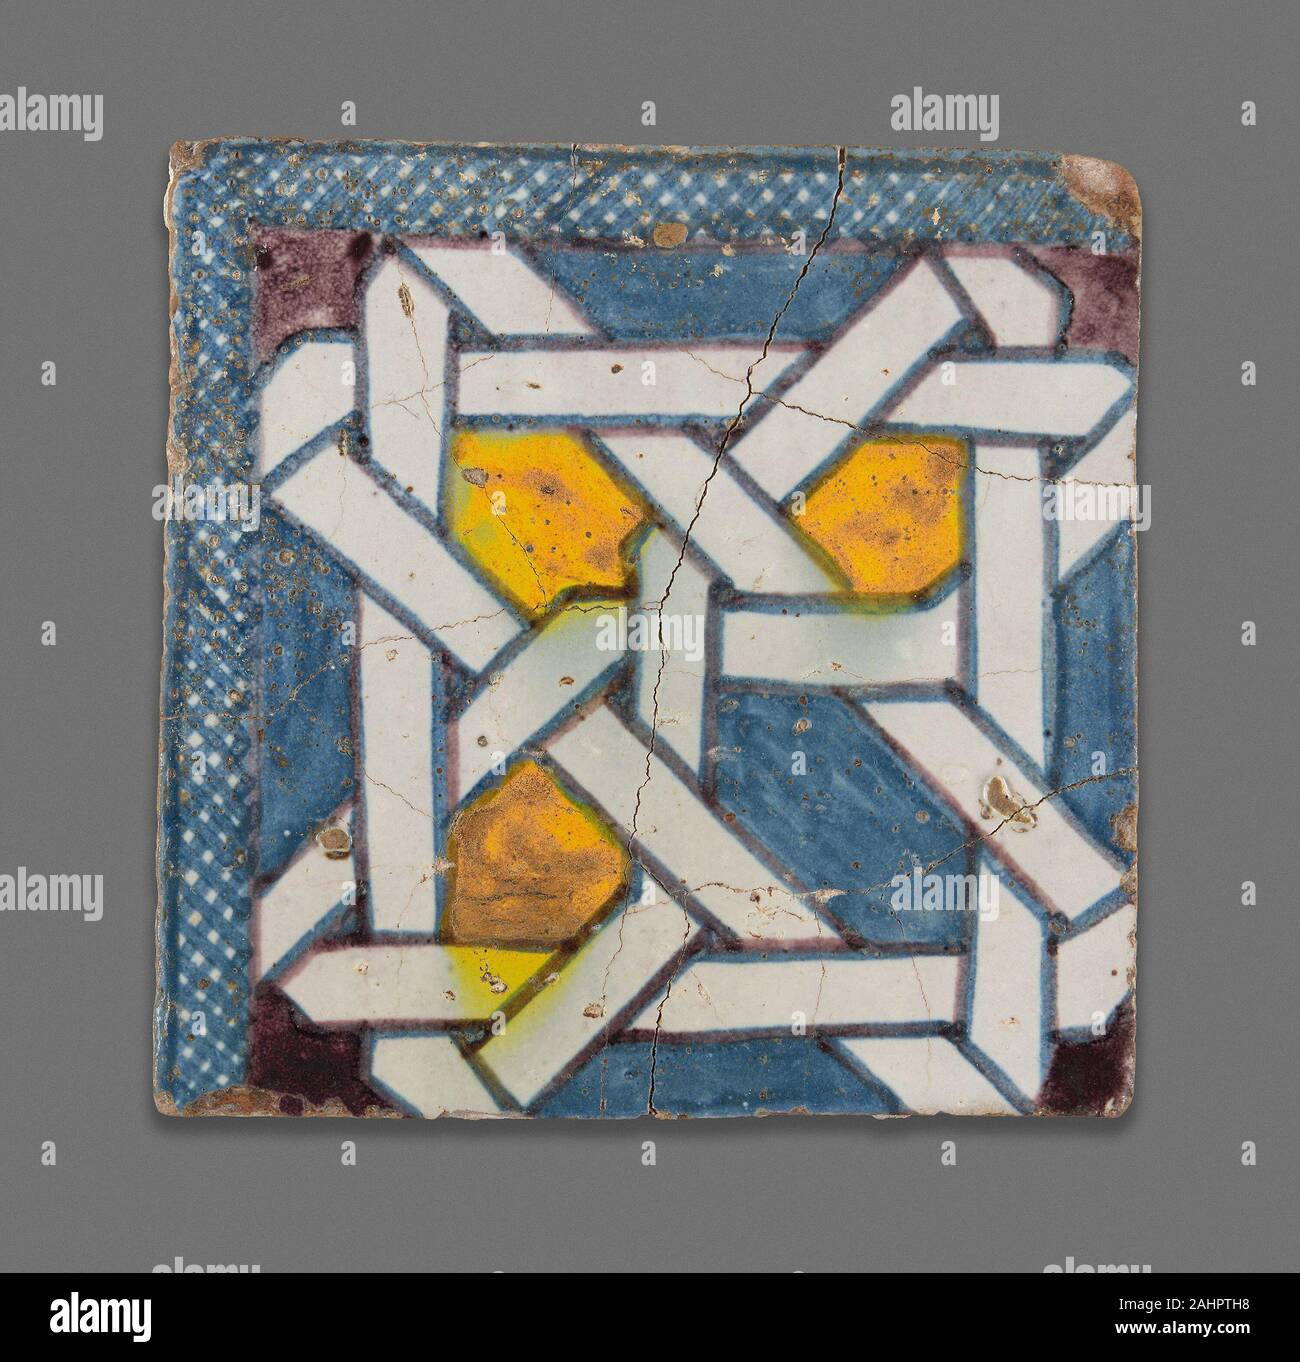 Square Tile. 1867–1899. Morocco. Poychrome pigment applied over opaque white glaze Geometric tilework comprised of individually cut pieces, or zillij, is a prominent feature of Moroccan architecture dating back more than 700 years. It is incredibly costly to make due to the skill involved in the design and layout of the mosaic. This imitation zillij tile achieves a similar effect while reducing the cost of labor and materials, and it speaks to the enduring importance of the zillij style as a highly prized art form in 19th-century Morocco. In an architectural context, numerous zilij tiles would Stock Photo